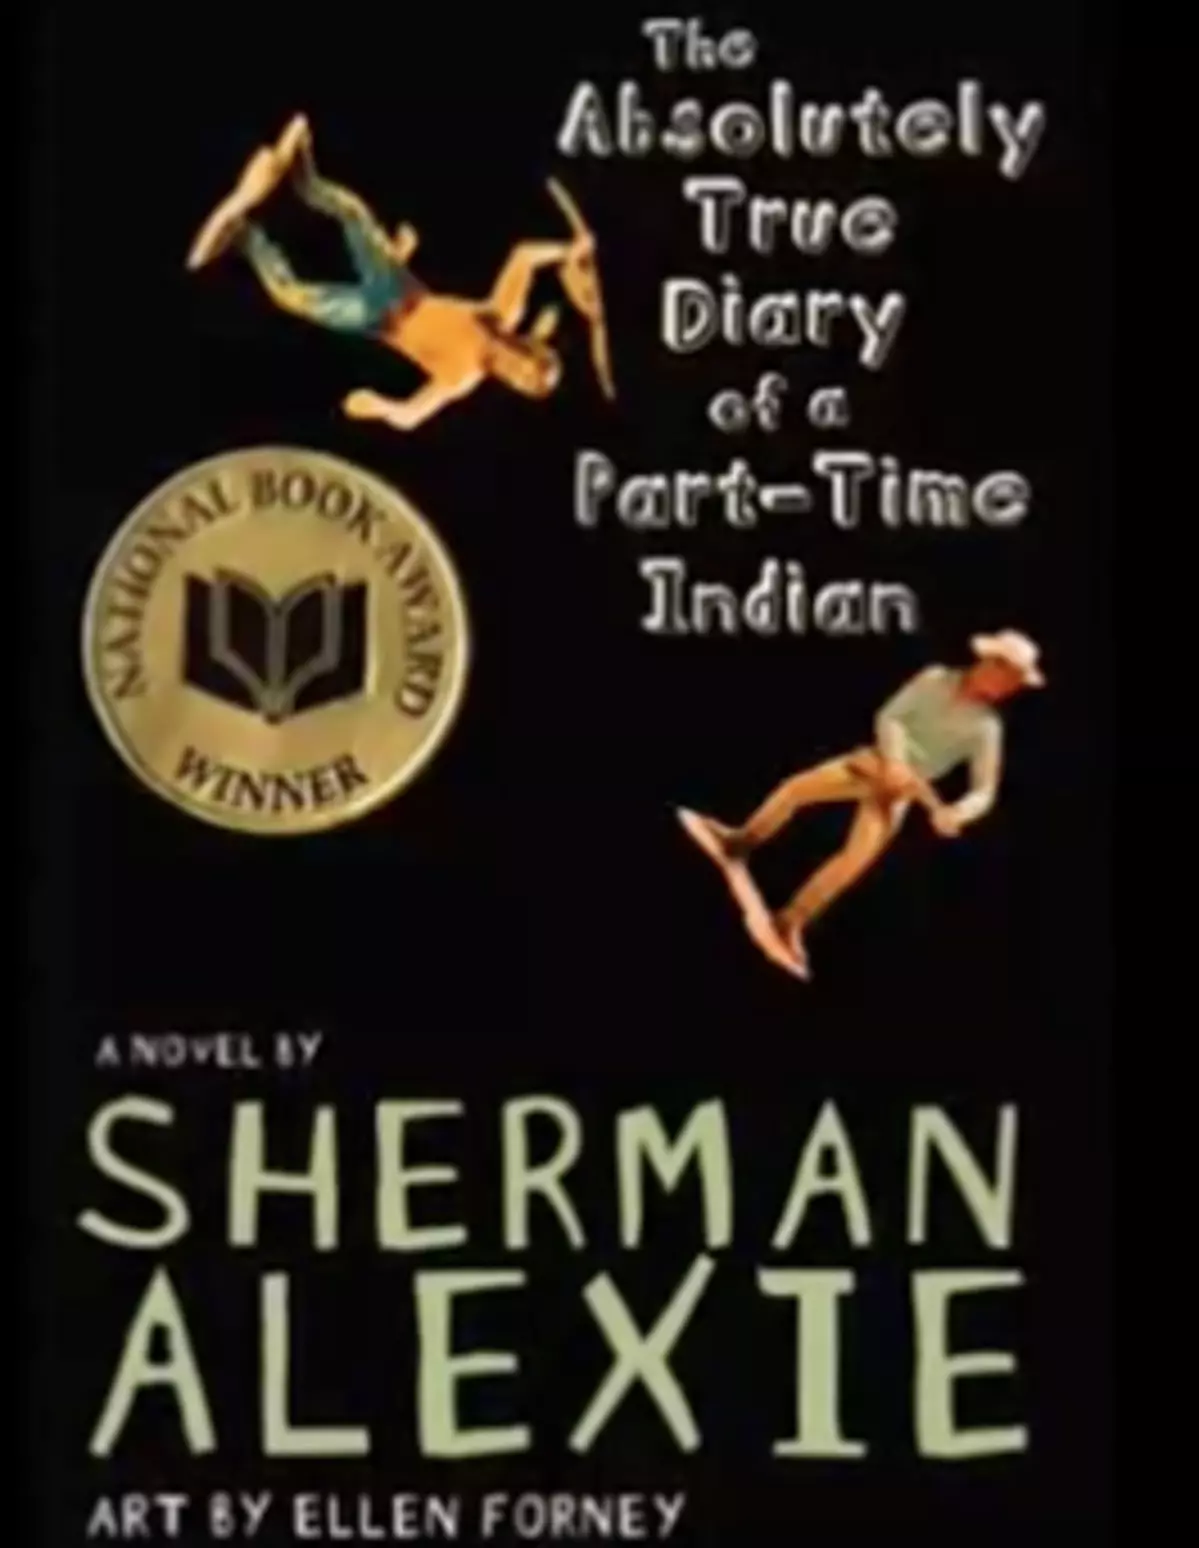 Diary Of A Part Time Indian Banned From School Reading List Due To